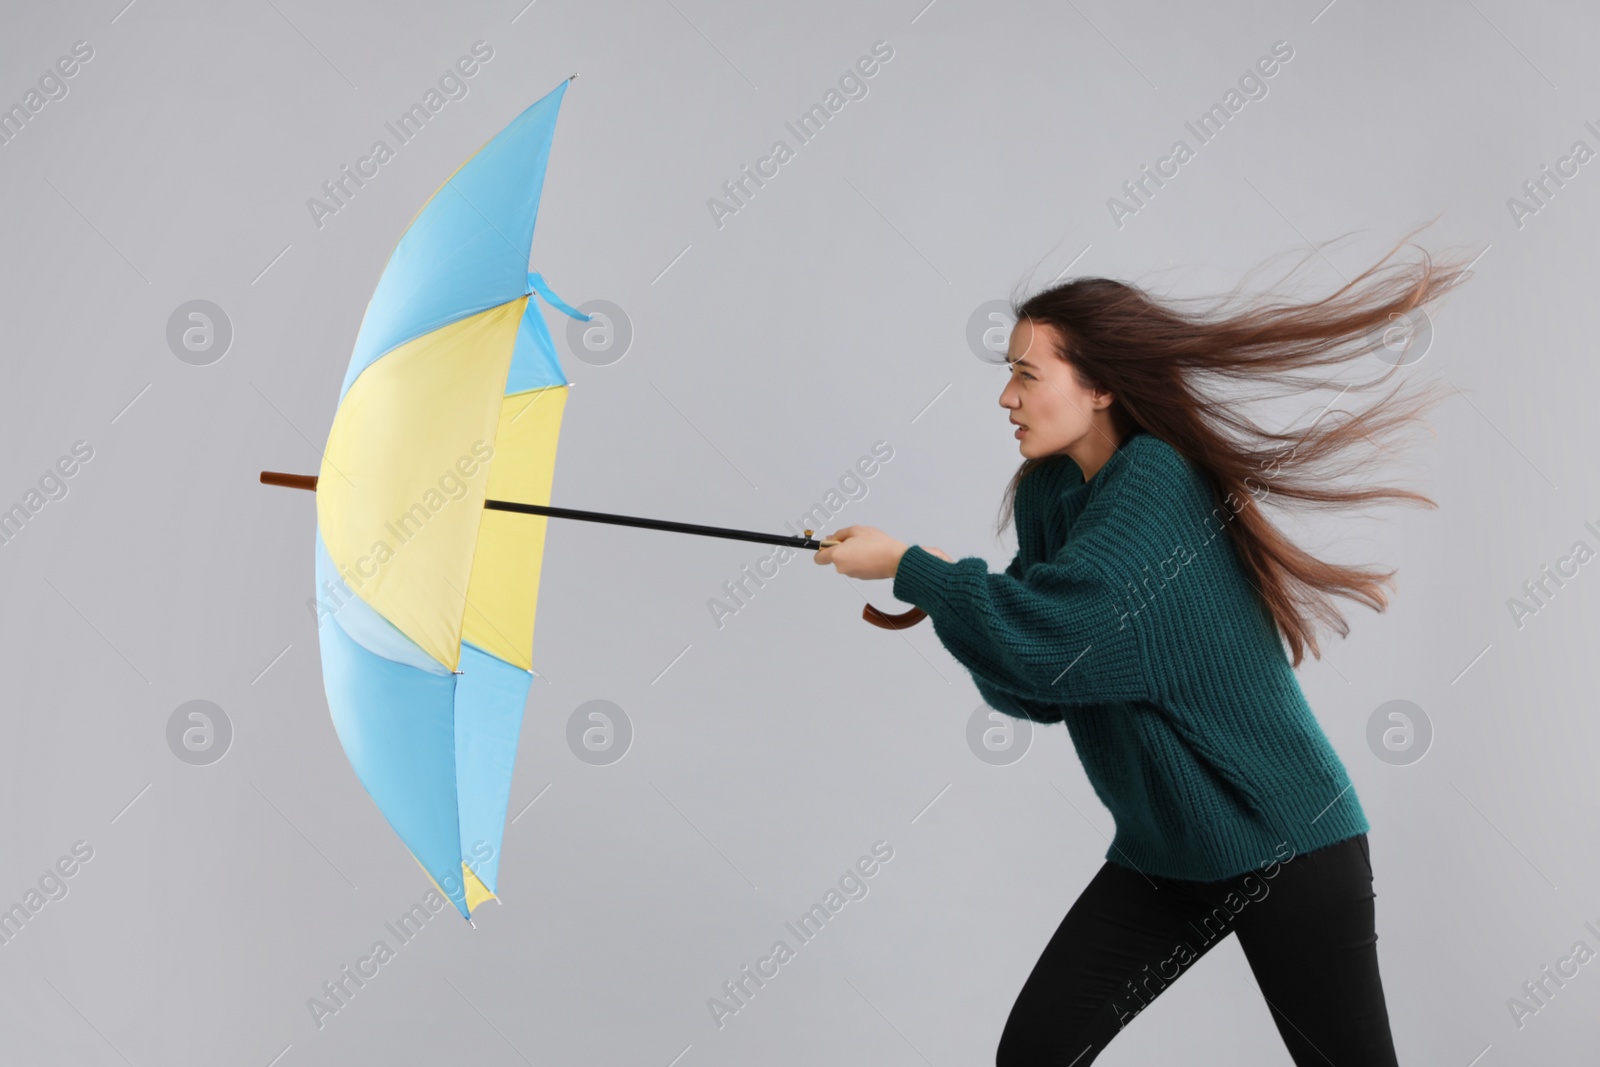 Photo of Woman with umbrella caught in gust of wind on grey background